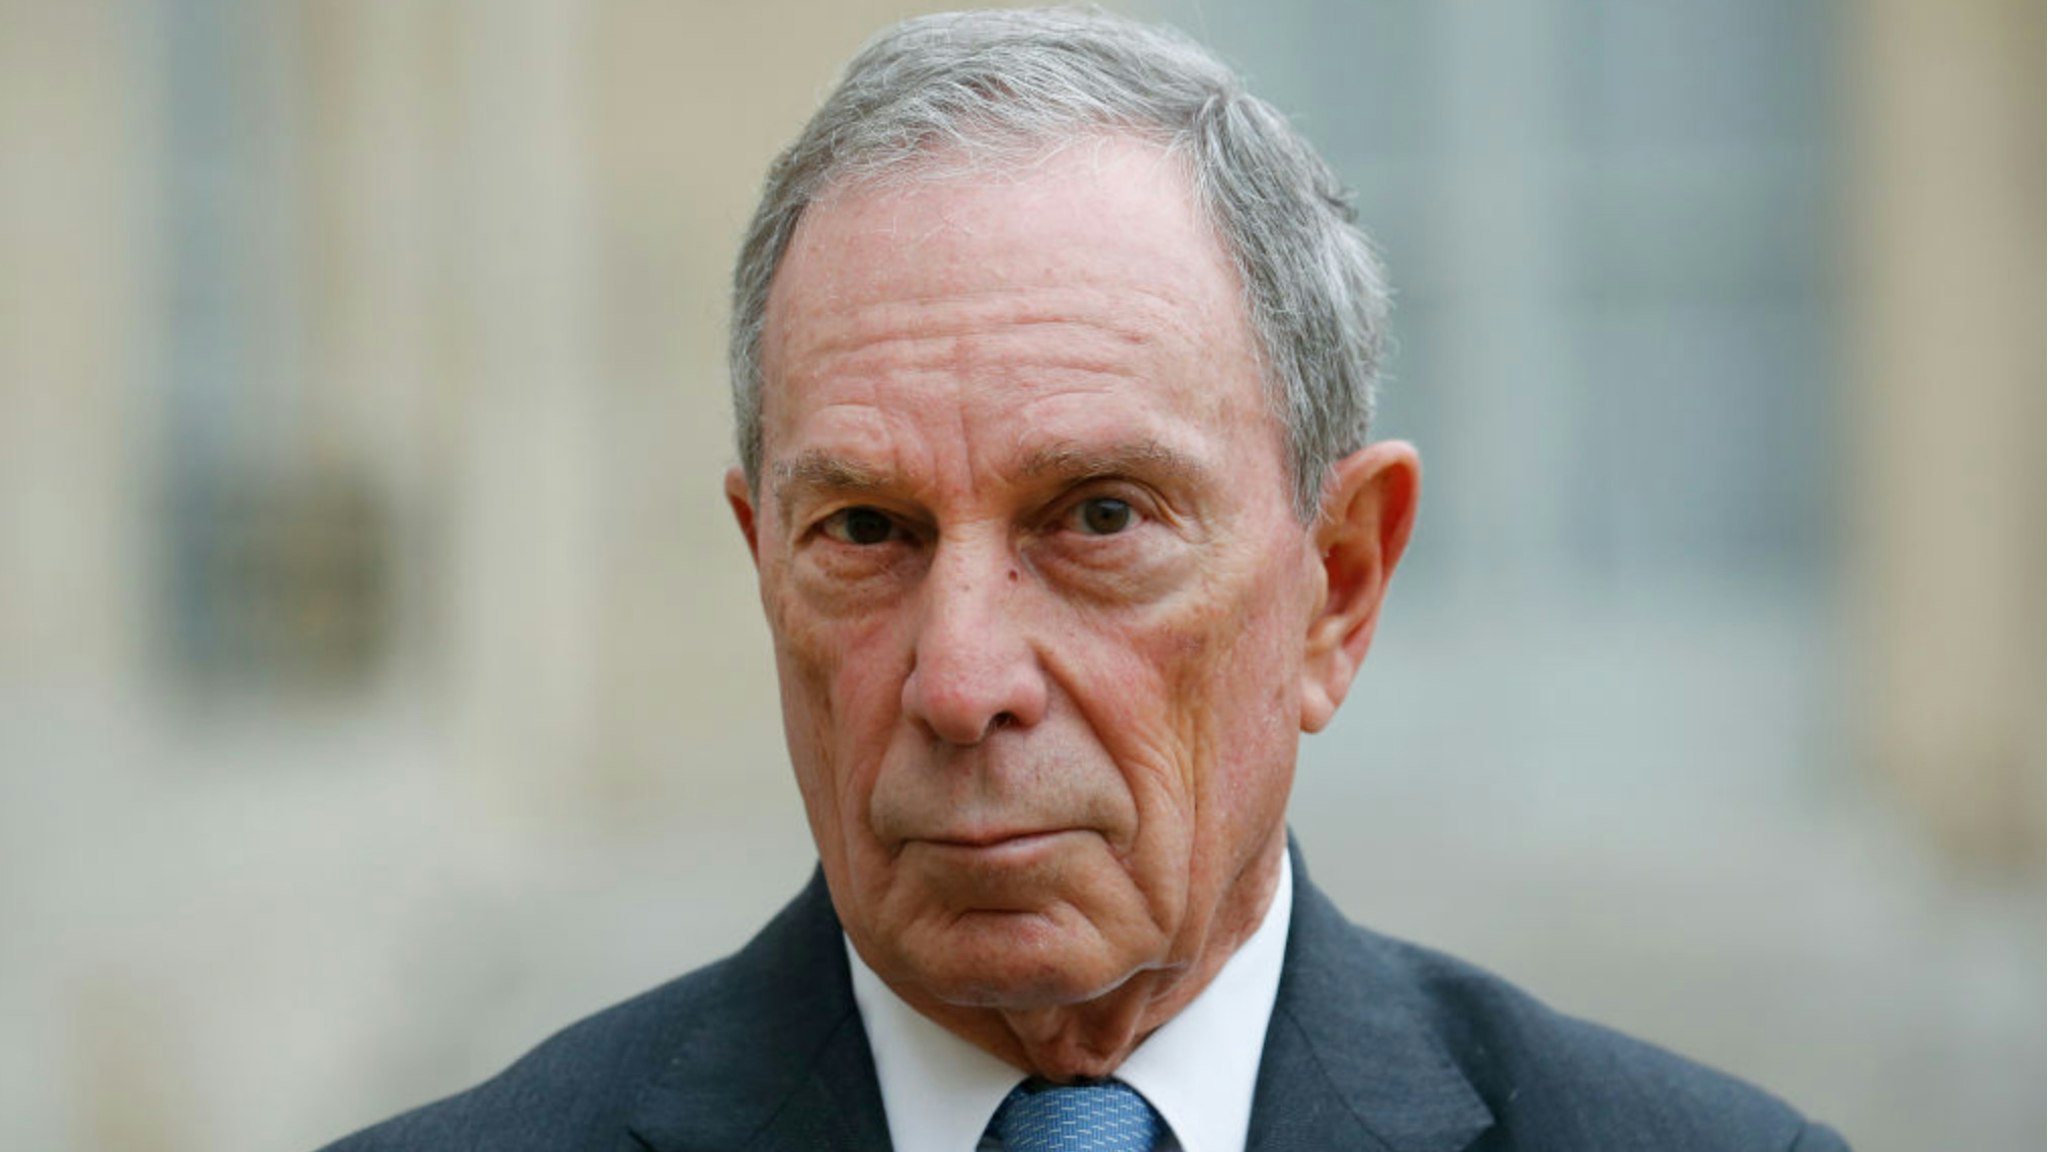 Former Mayor of New York City, Michael Bloomberg makes a statement after his meeting with French President Francois Hollande and Paris City Mayor Anne Hidalgo at the Elysee Presidential Palace on March 09, 2017 in Paris, France.